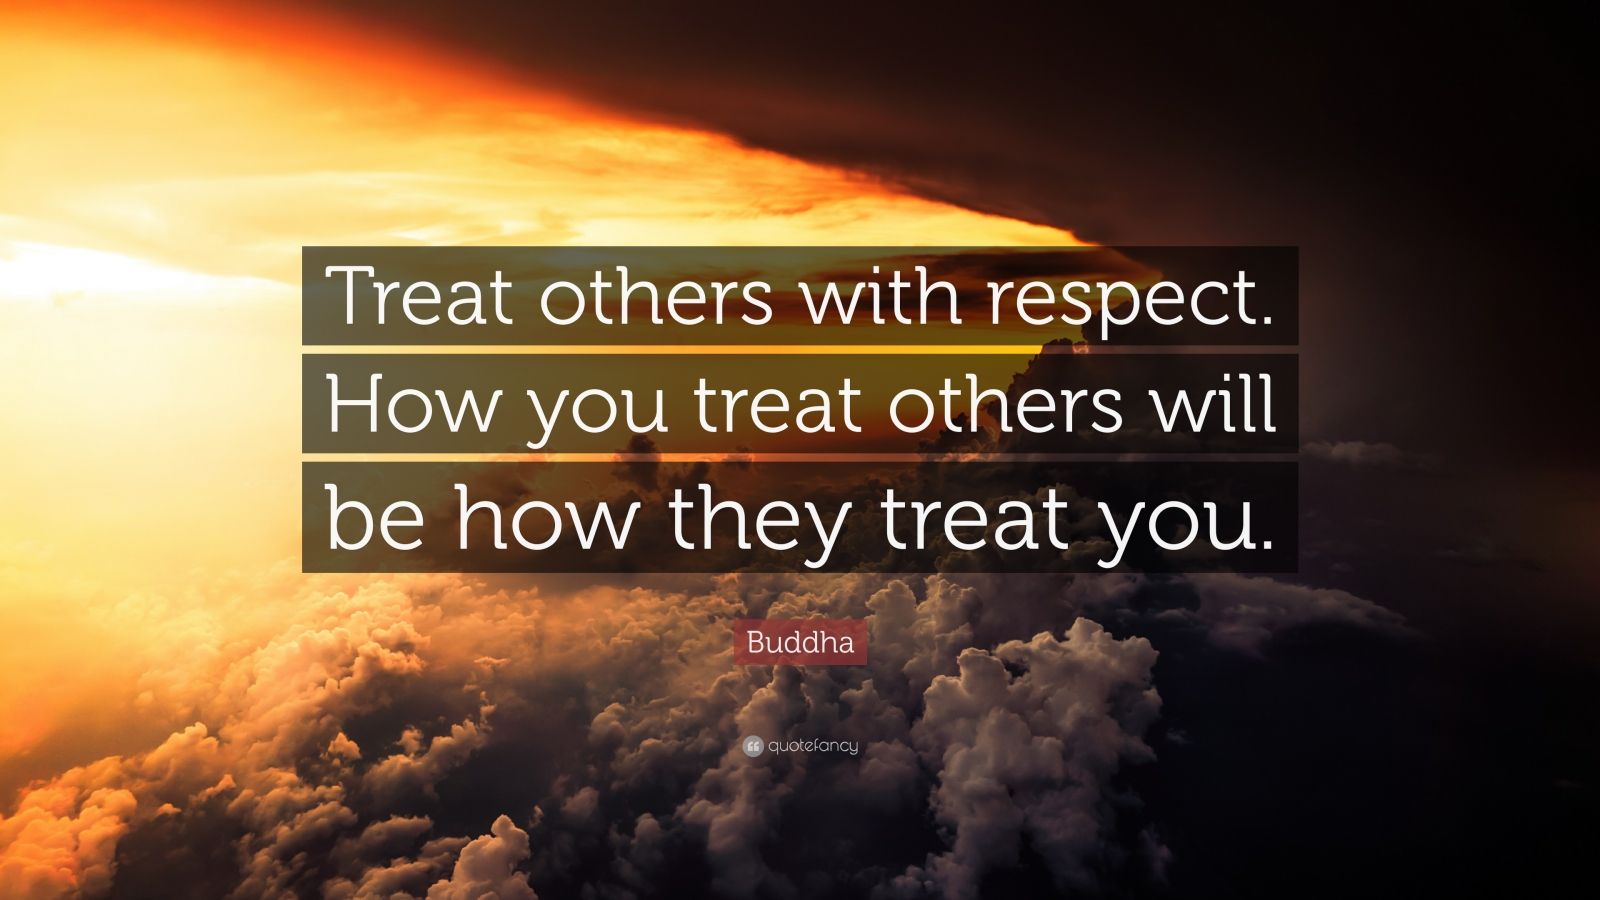 Buddha Quote: “Treat others with respect. How you treat others will be